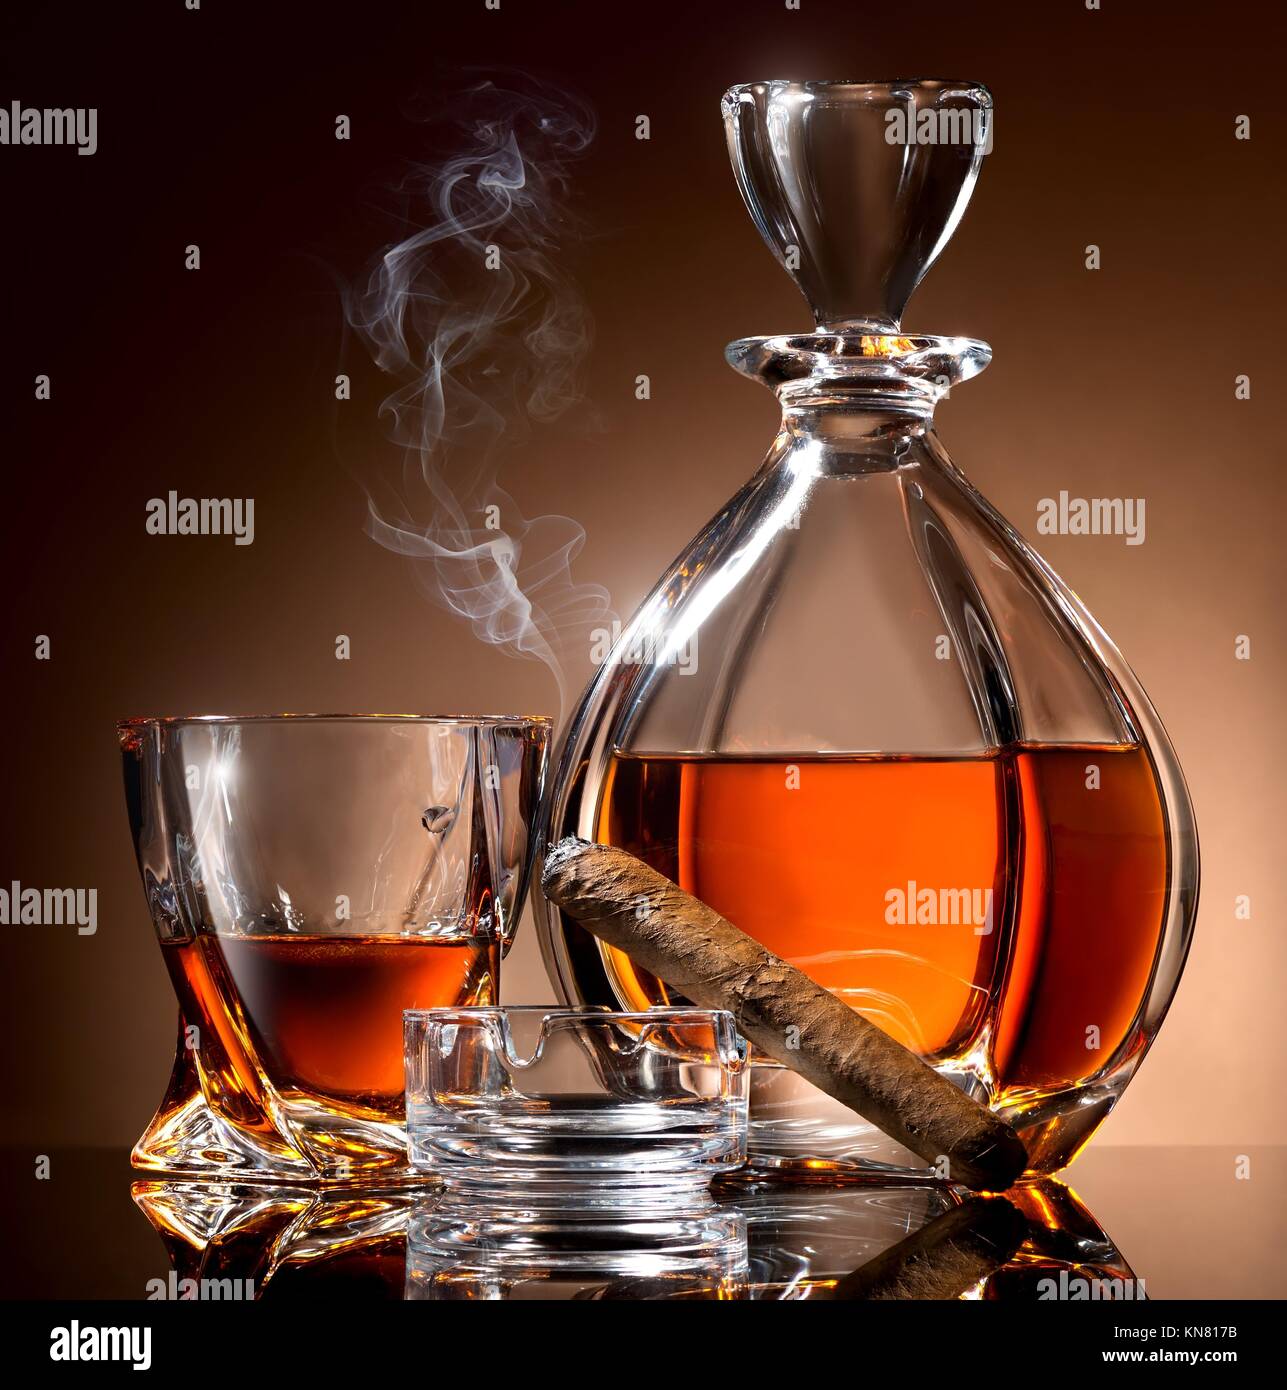 Decanter abd glass of alcohol and cigar on ashtray. Stock Photo